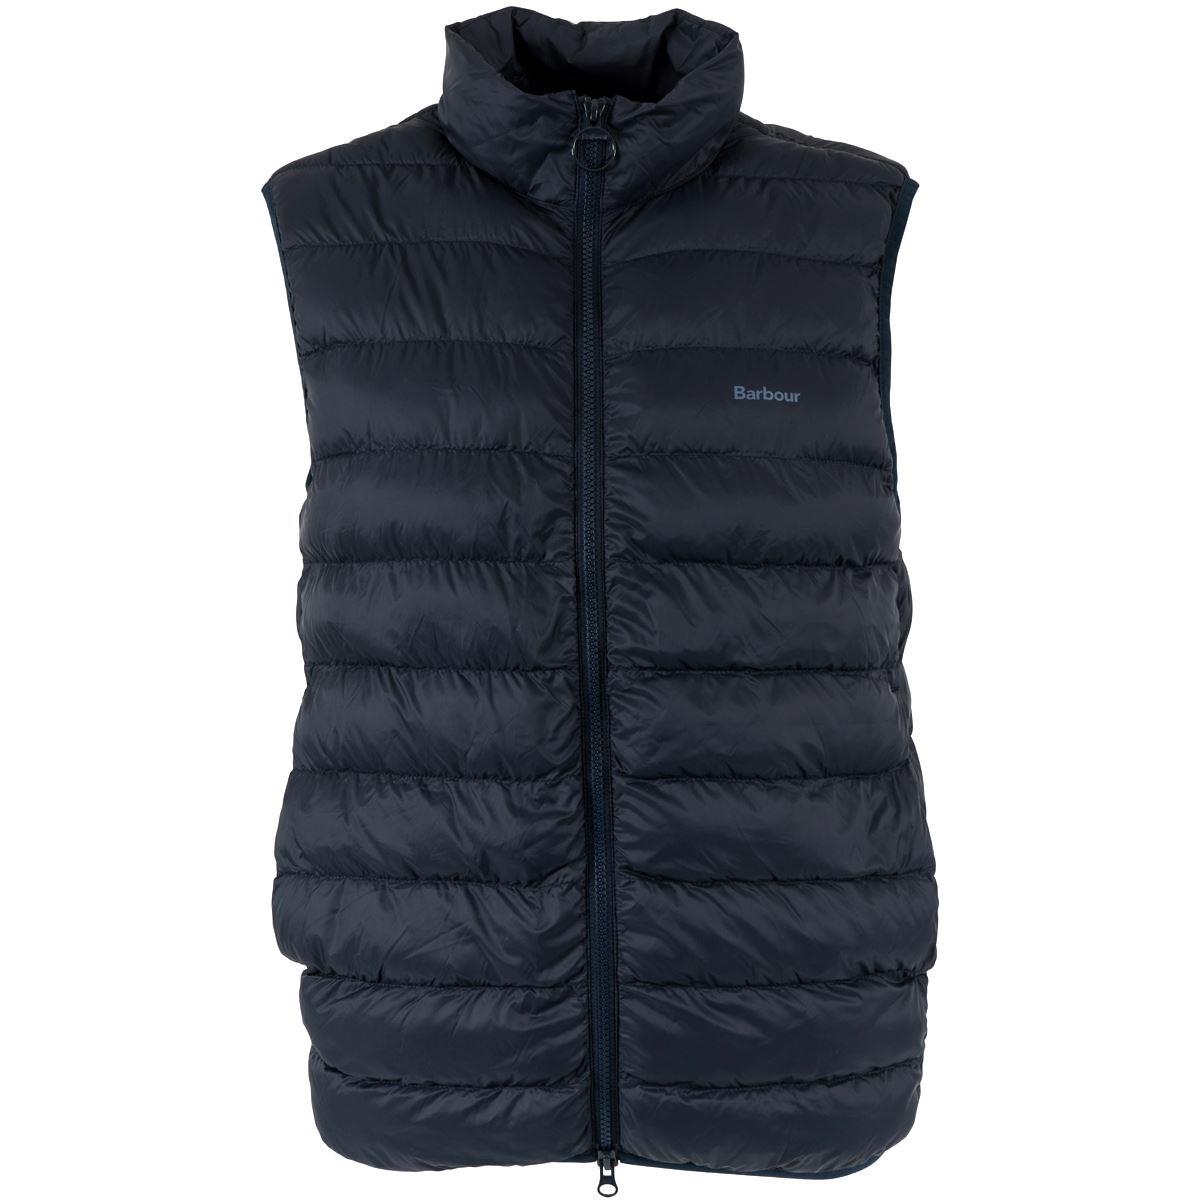 Does the Barbour Mens Bretby Quilted Gilet have inside pockets?